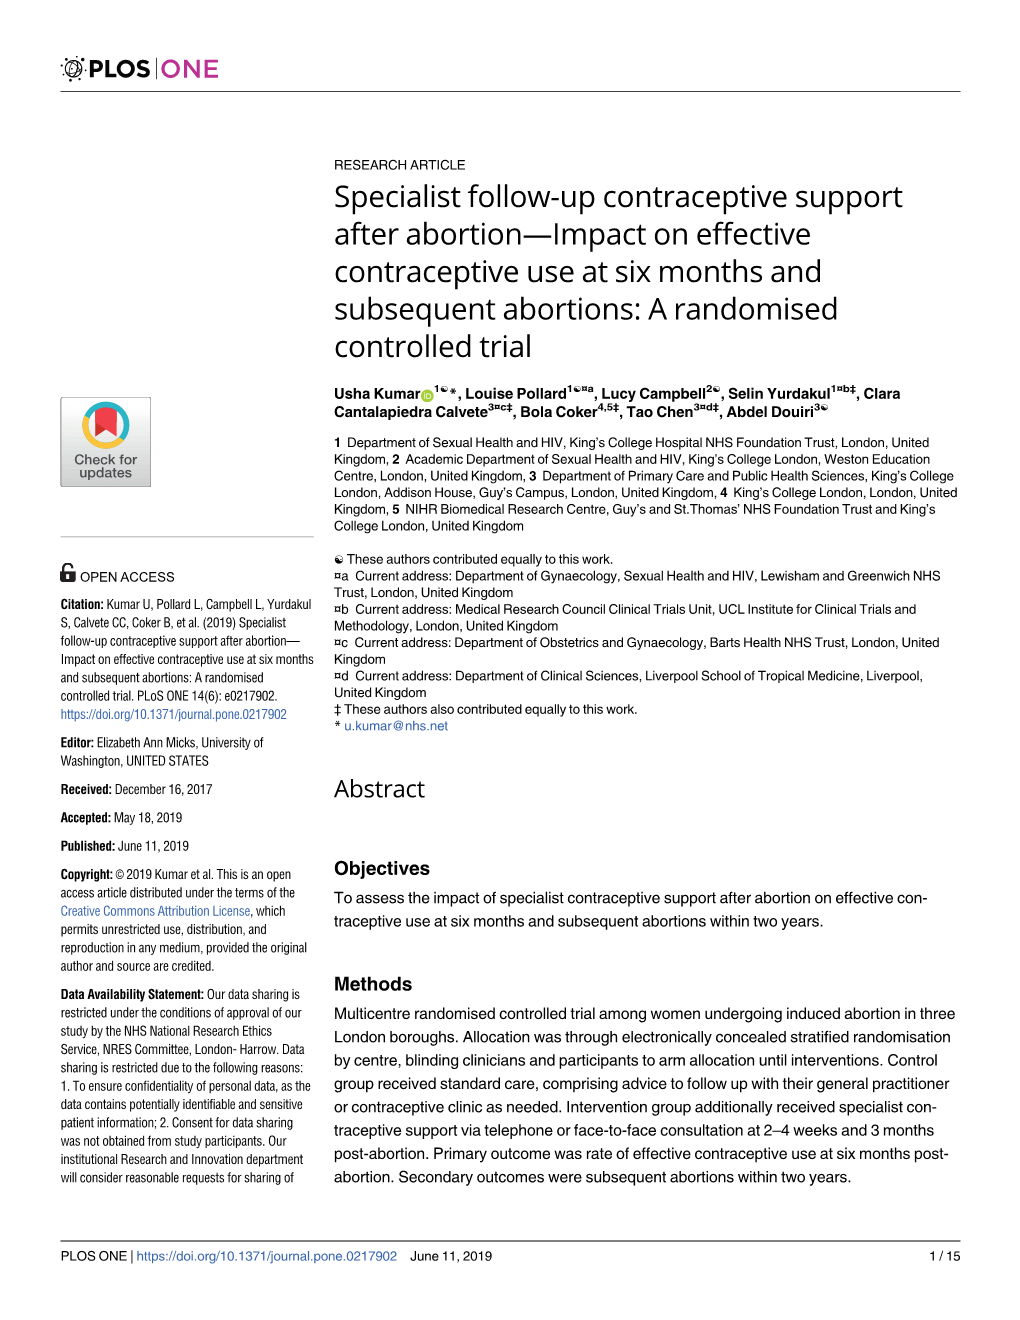 Specialist Follow-Up Contraceptive Support After Abortion—Impact on Effective Contraceptive Use at Six Months and Subsequent Abortions: a Randomised Controlled Trial